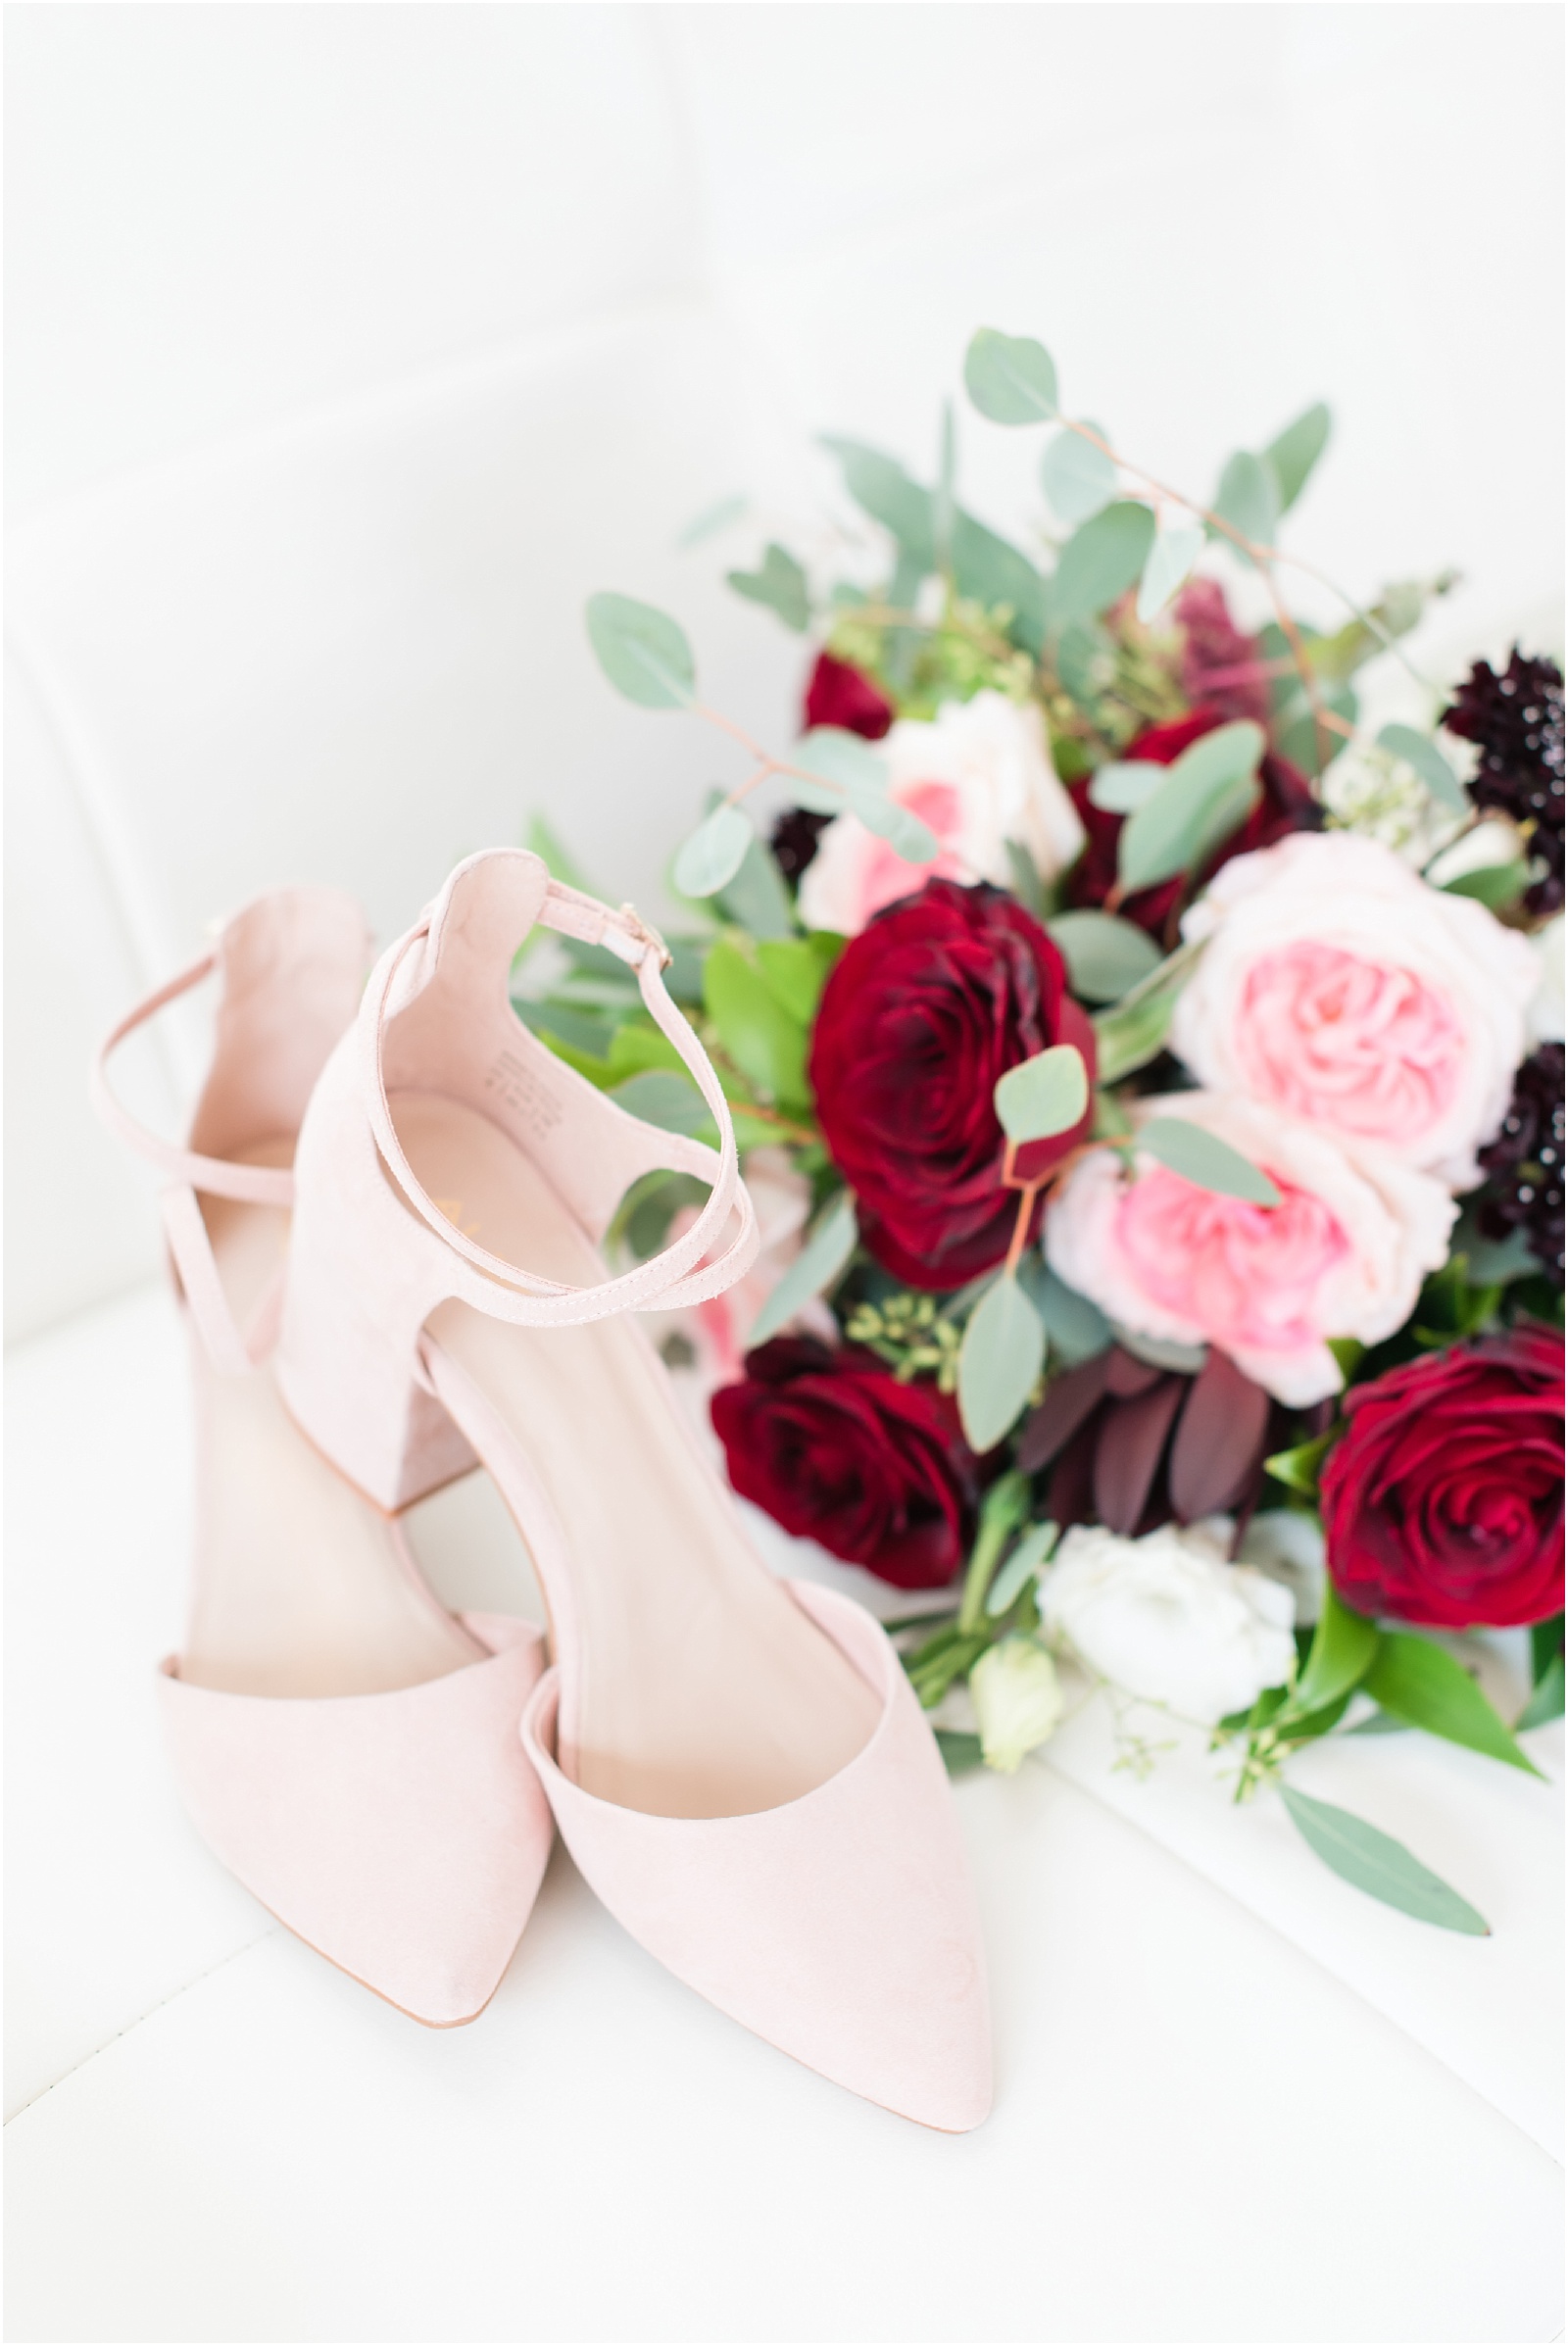 Brides pink suede shoes with Brides Boquet filled with pink and red rosses with gray green greenery at the glass box